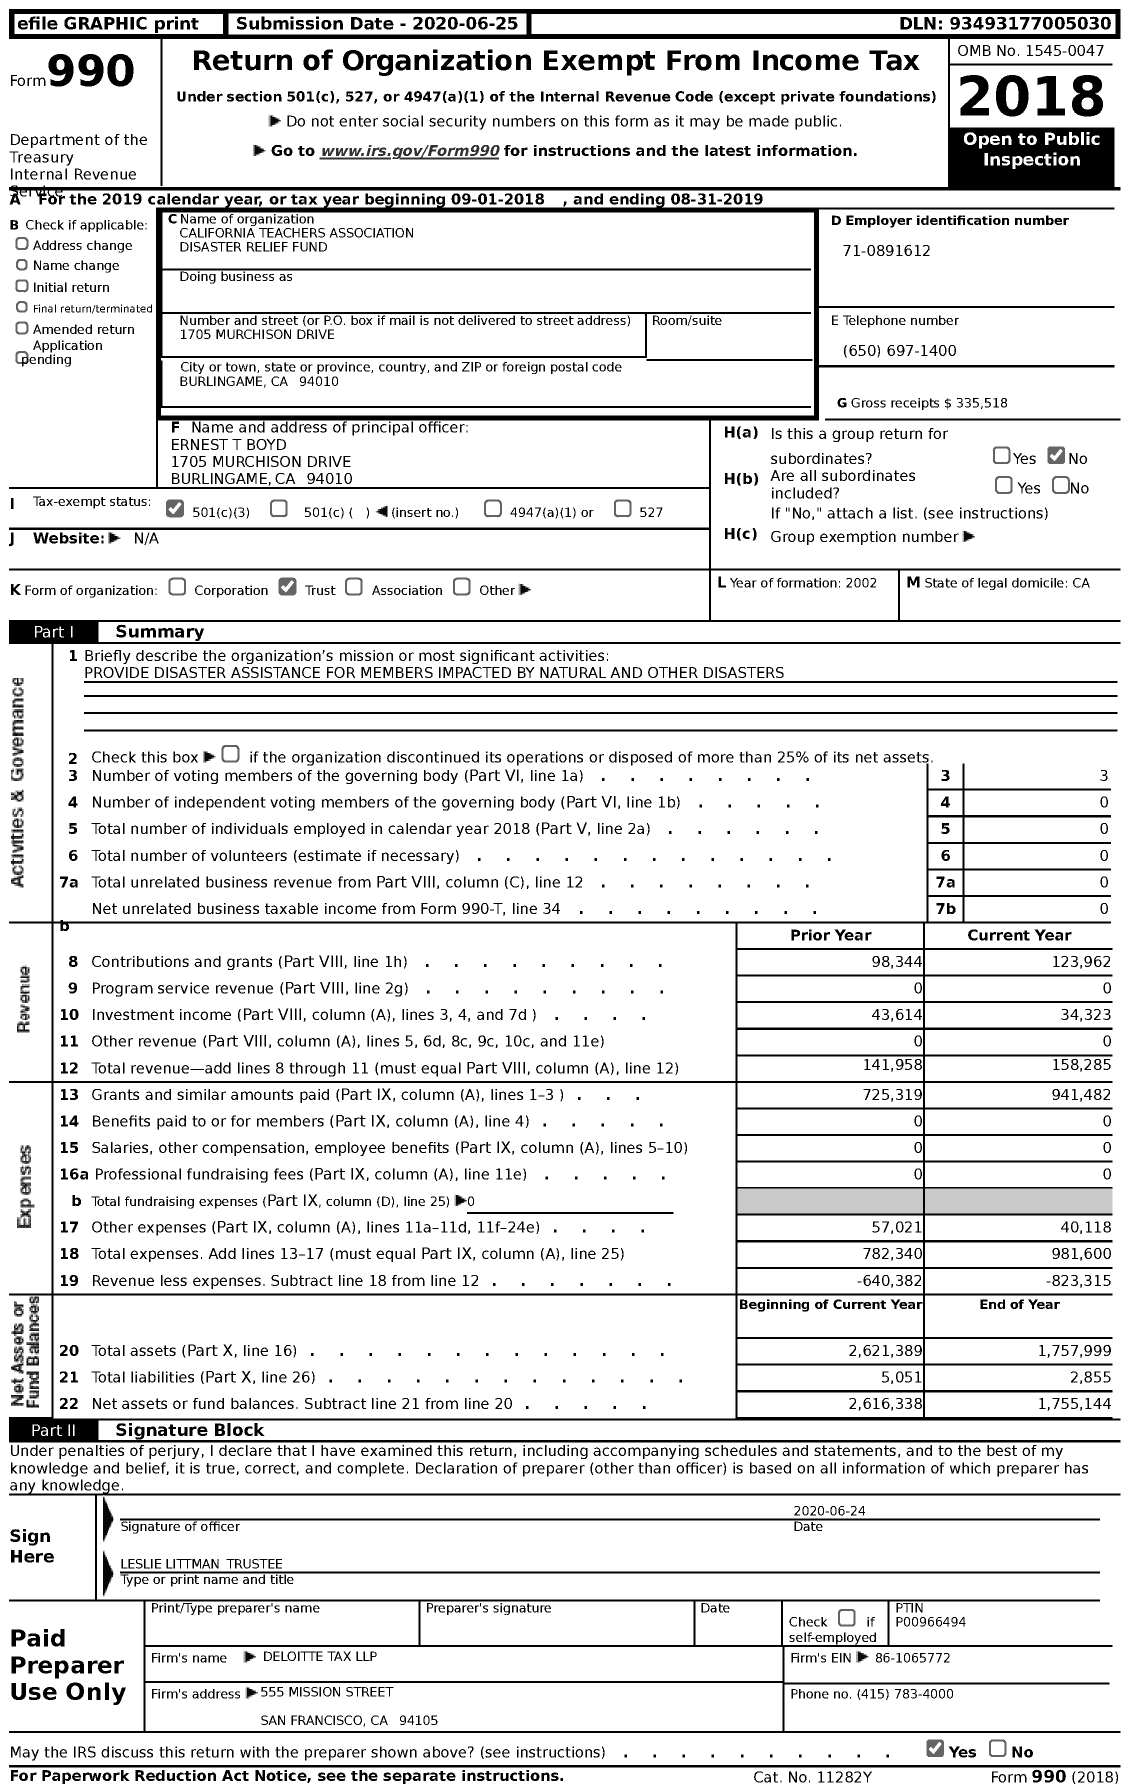 Image of first page of 2018 Form 990 for California Teachers Association Disaster Relief Fund